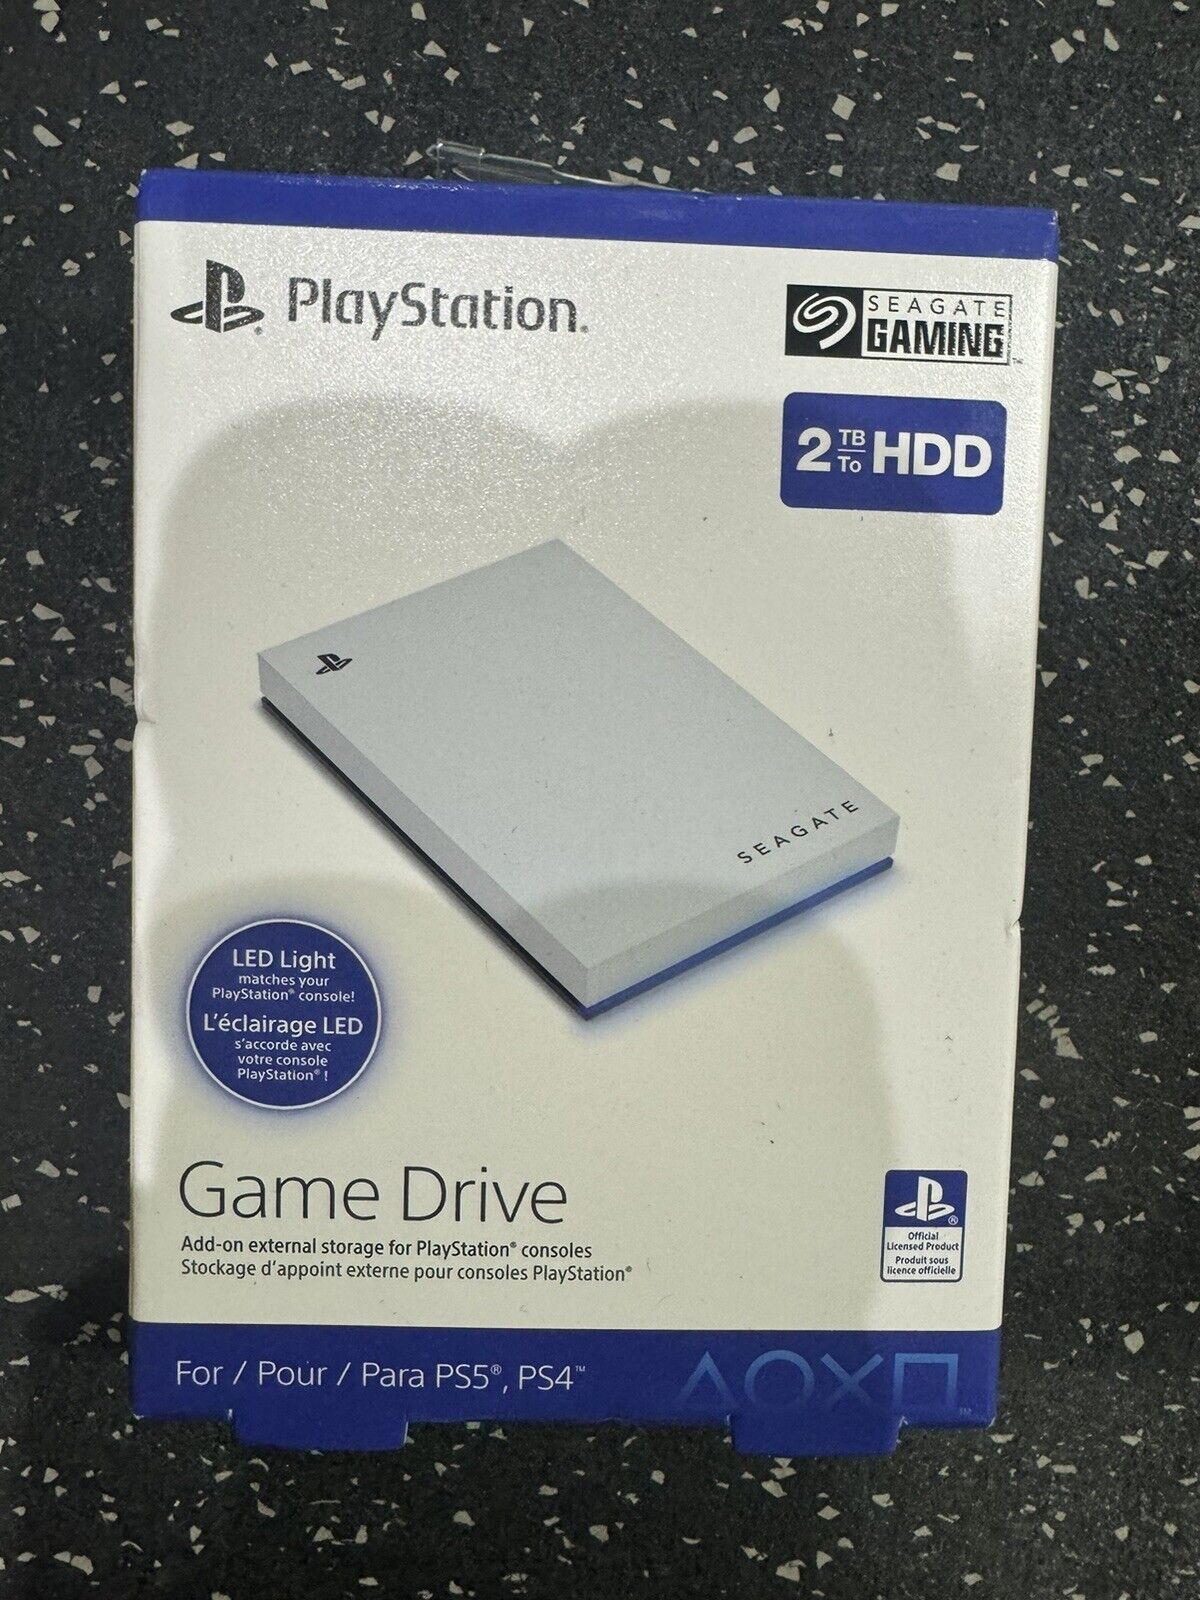 Seagate Game Drive for PS5 2TB External HDD - USB 3.0, SEALED 